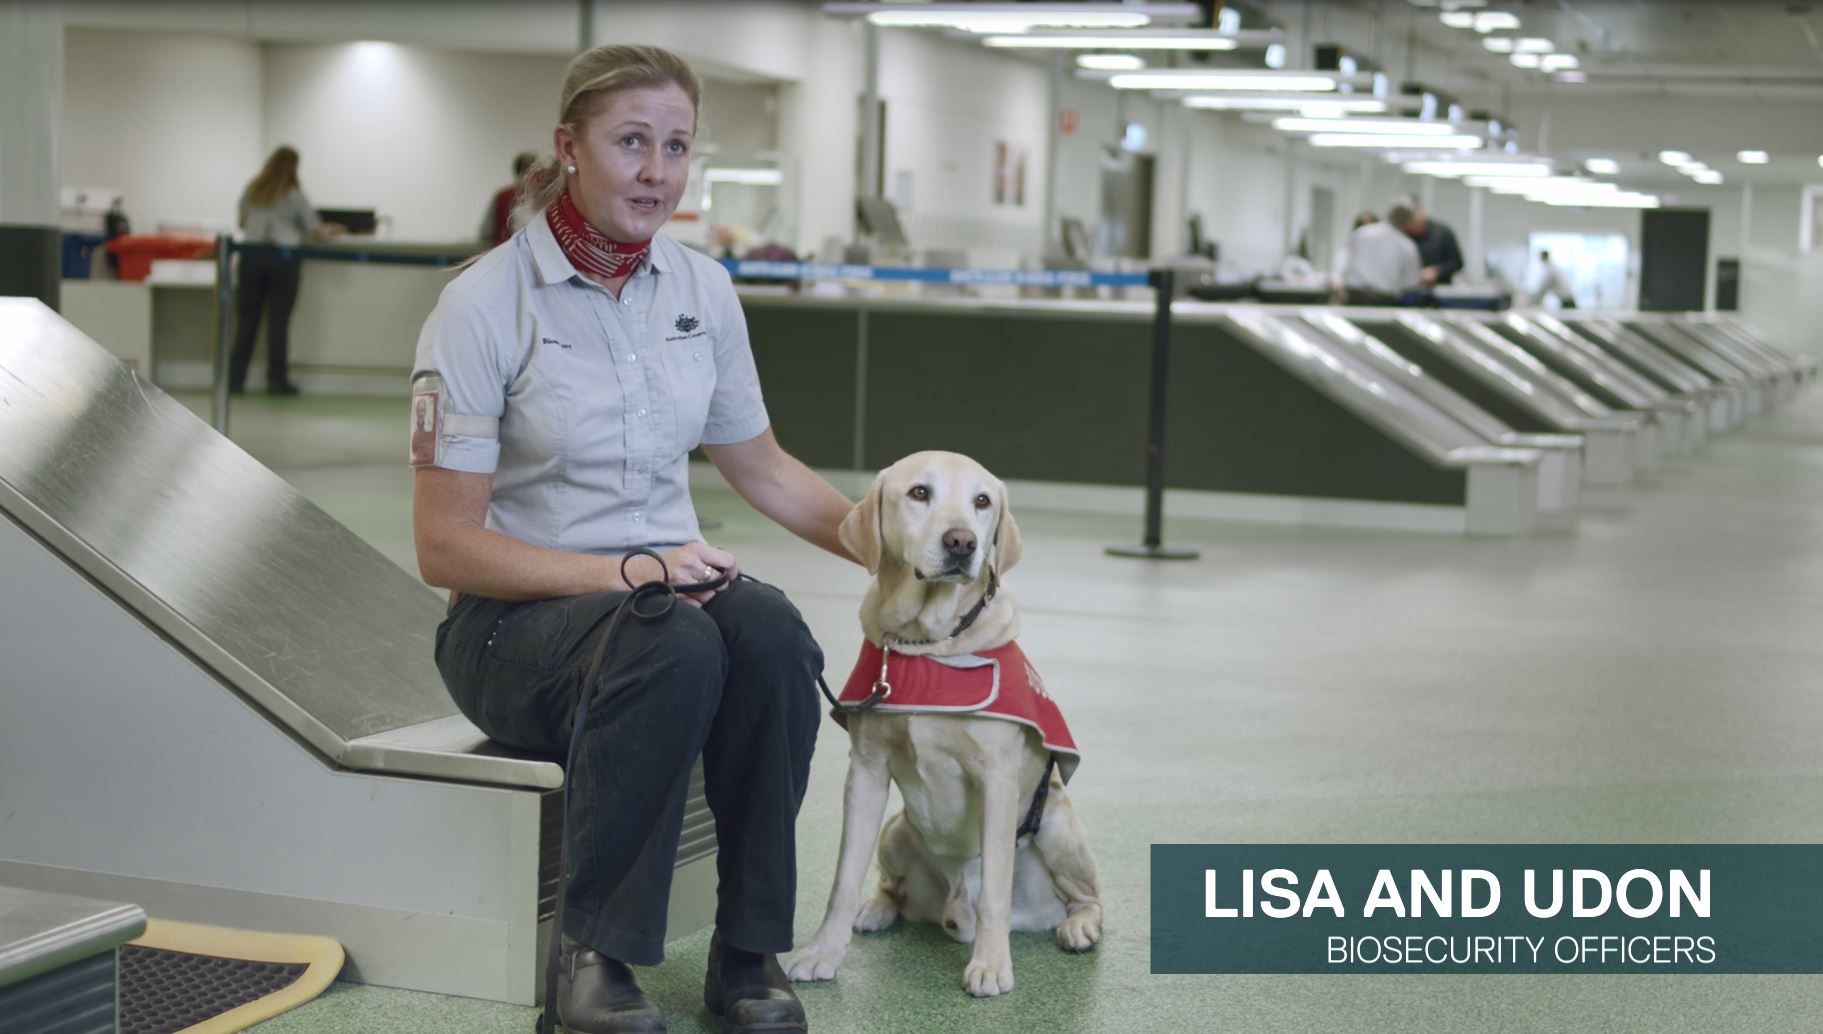 Lisa and Udon (aka Donnie) are Biosecurity Officers with the Department of Agriculture and Water Resources